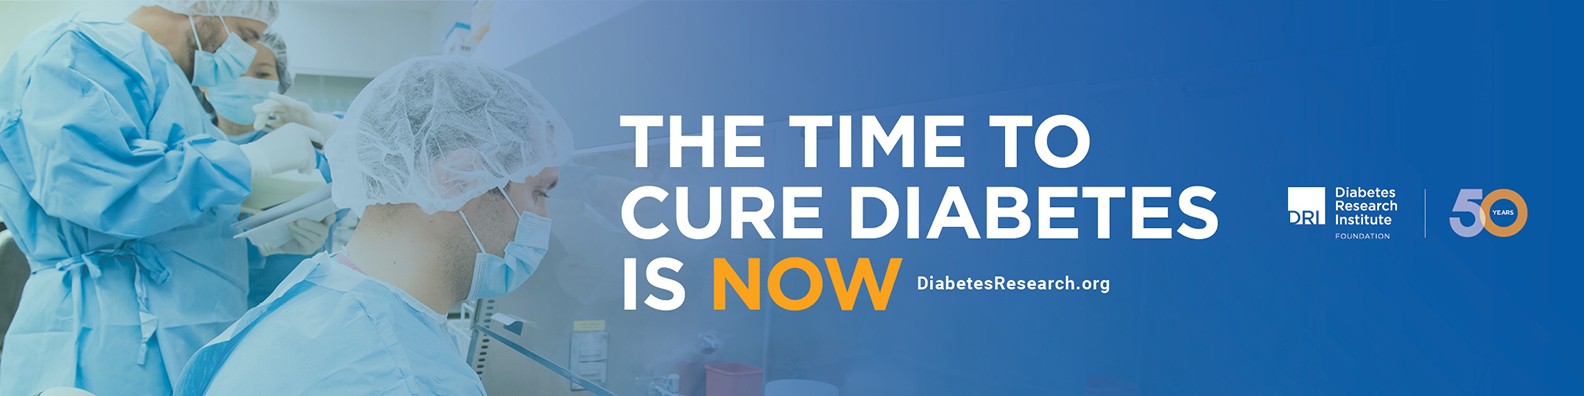 diabetes research and wellness foundation inc